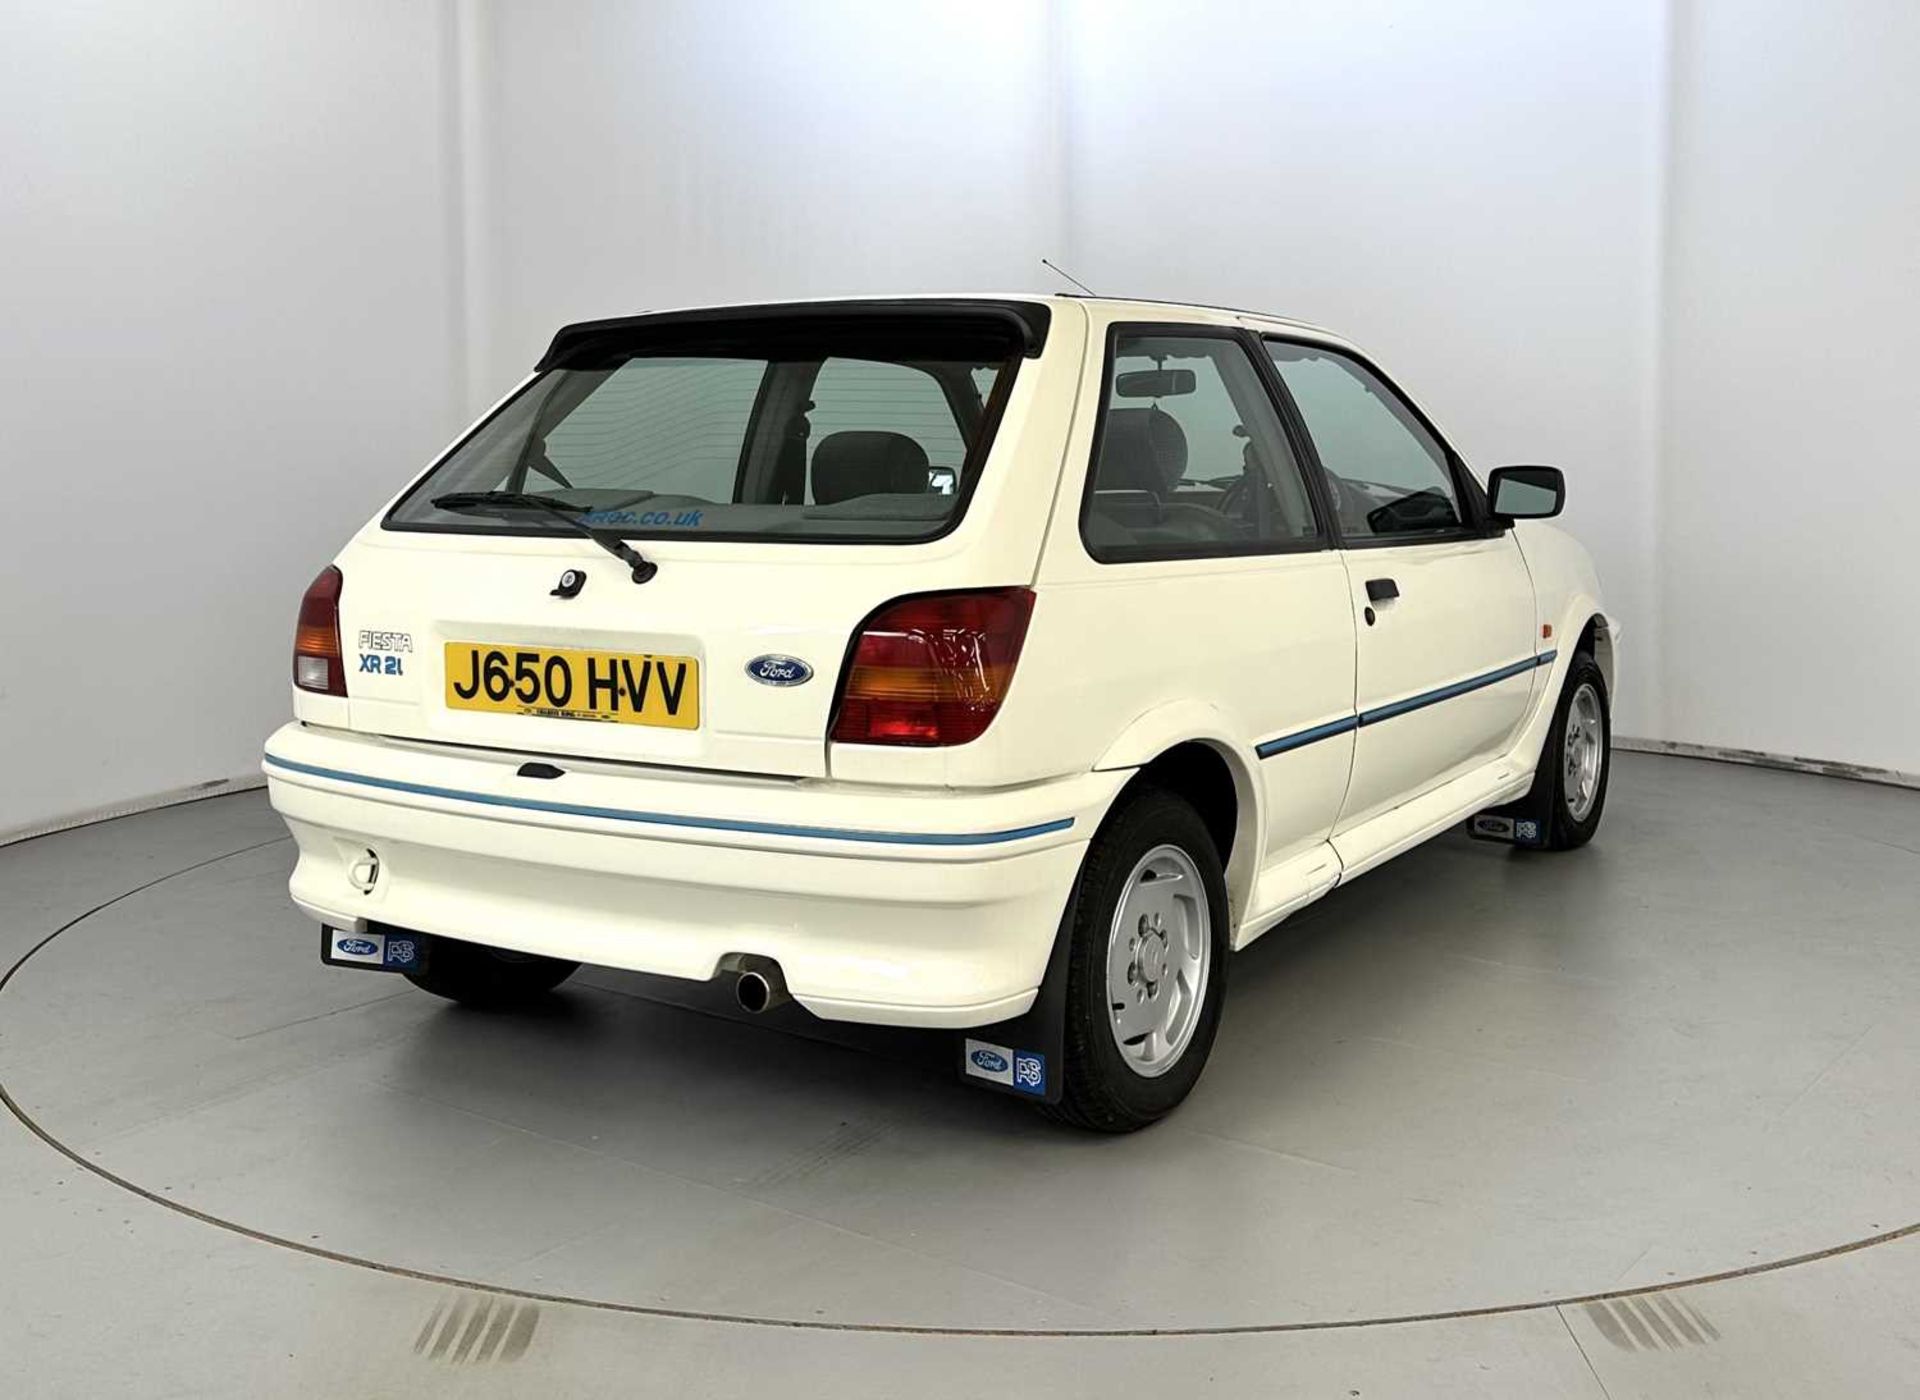 1991 Ford Fiesta XR2i - Image 9 of 30